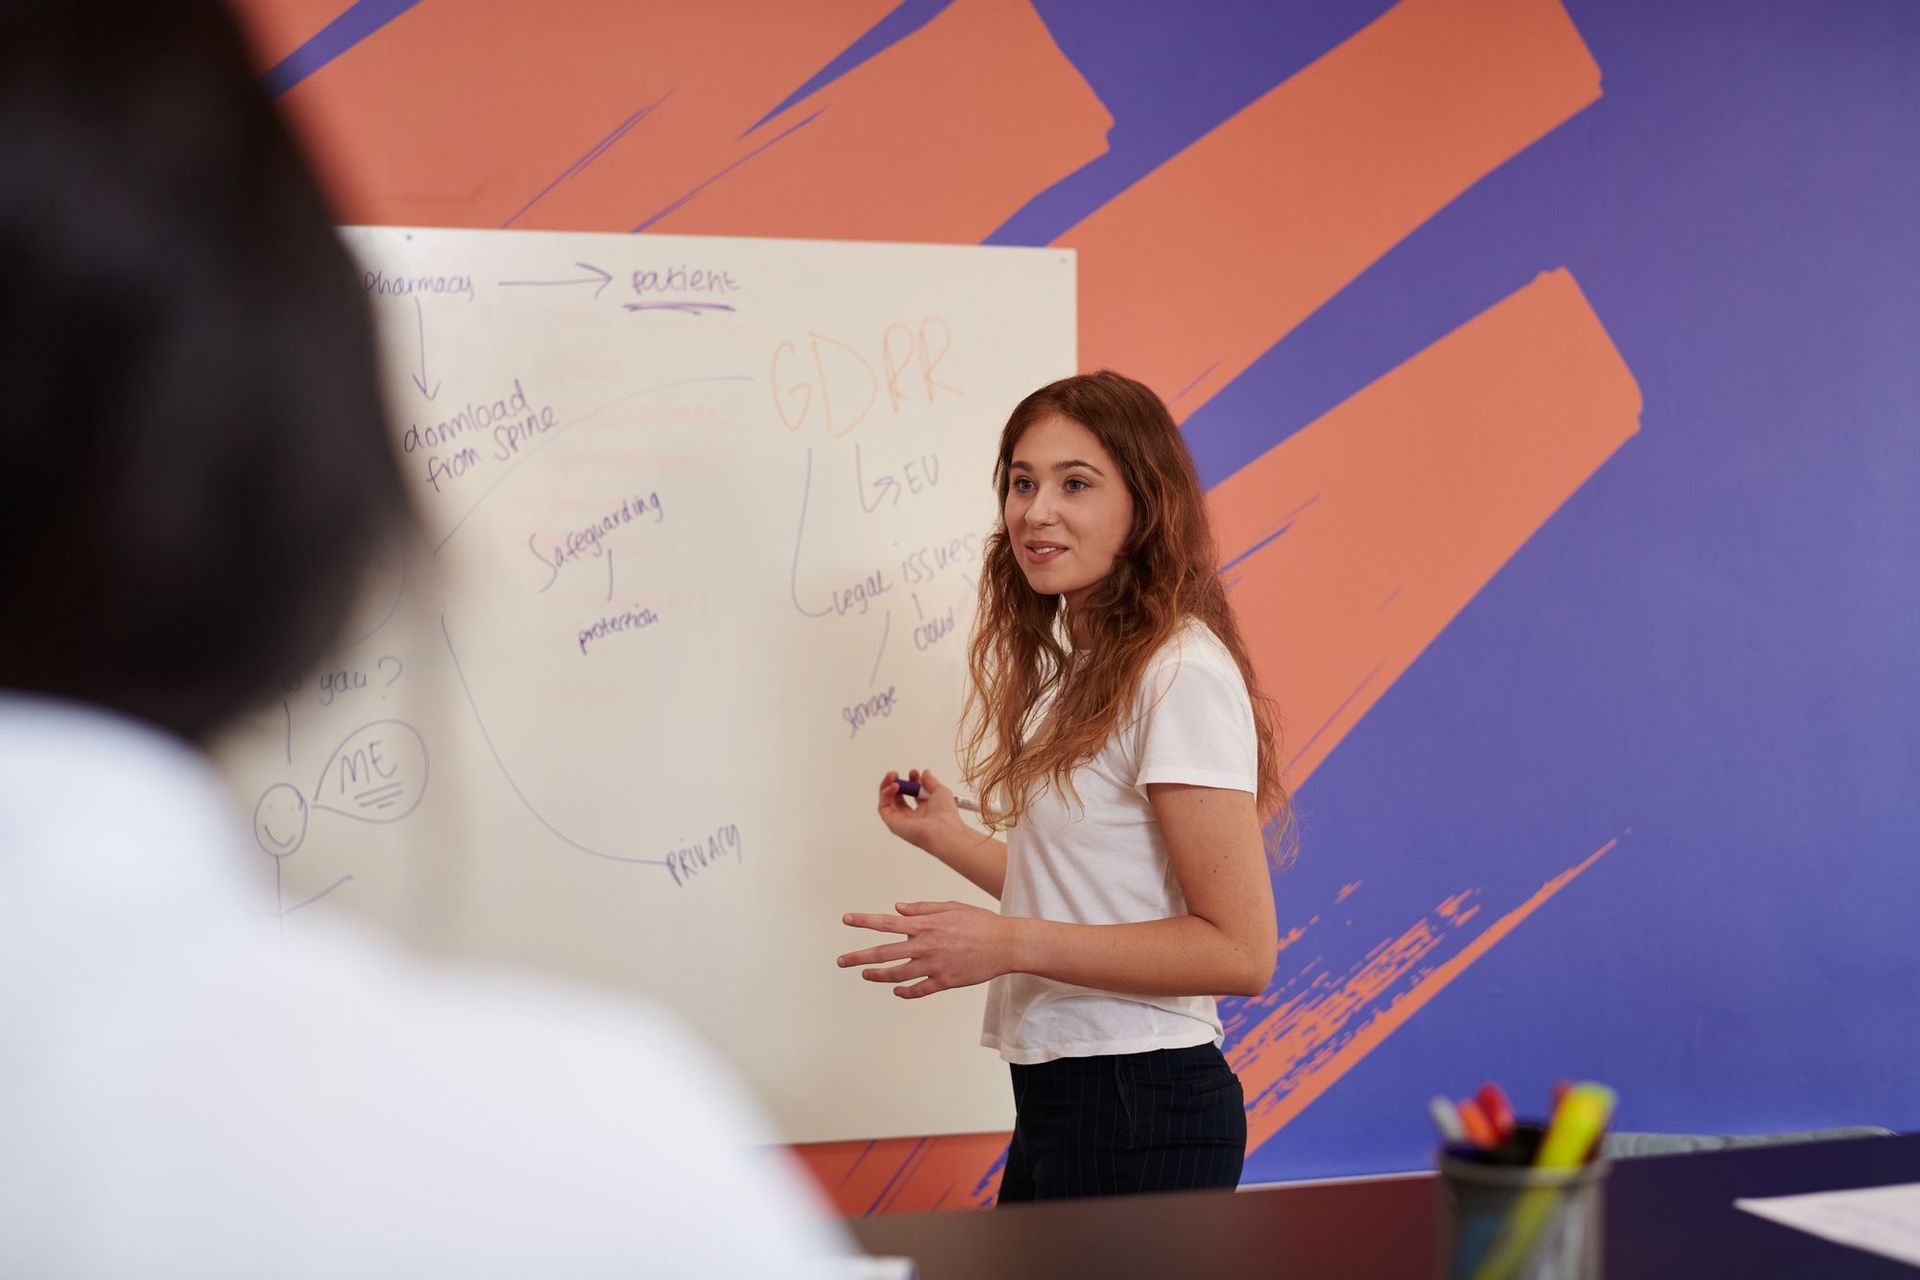 An apprentice stands at a whiteboard